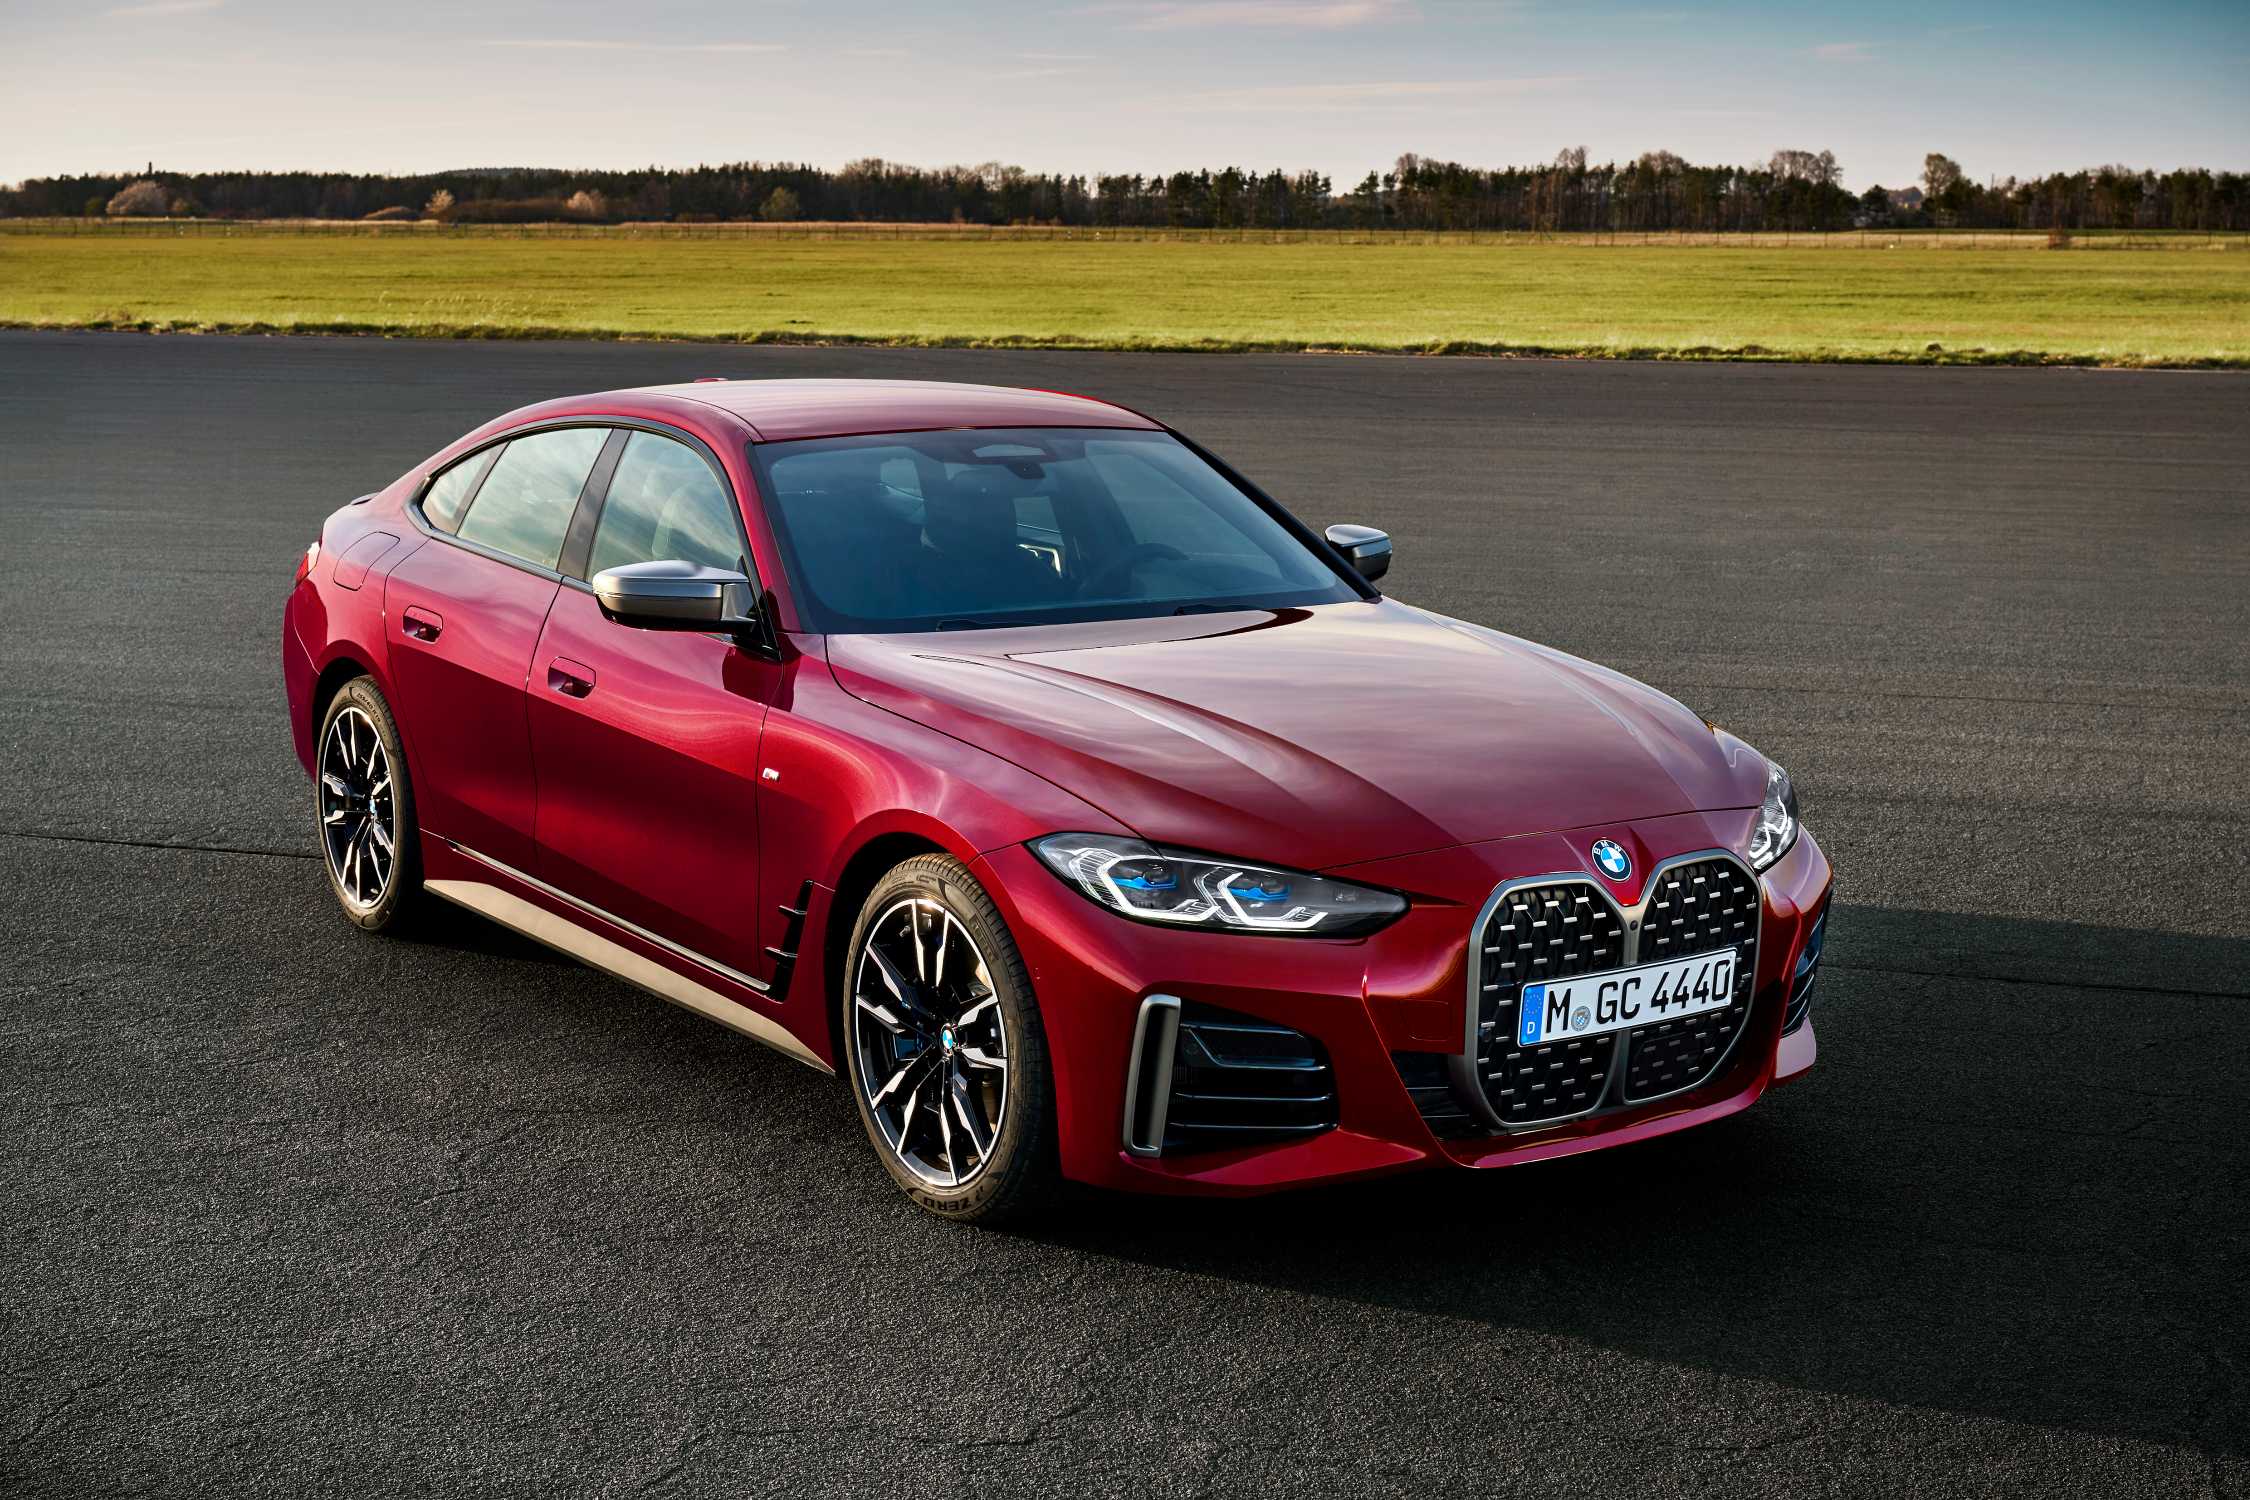 BMW 4 Series Gran Coupe Revealed - The Car Guide